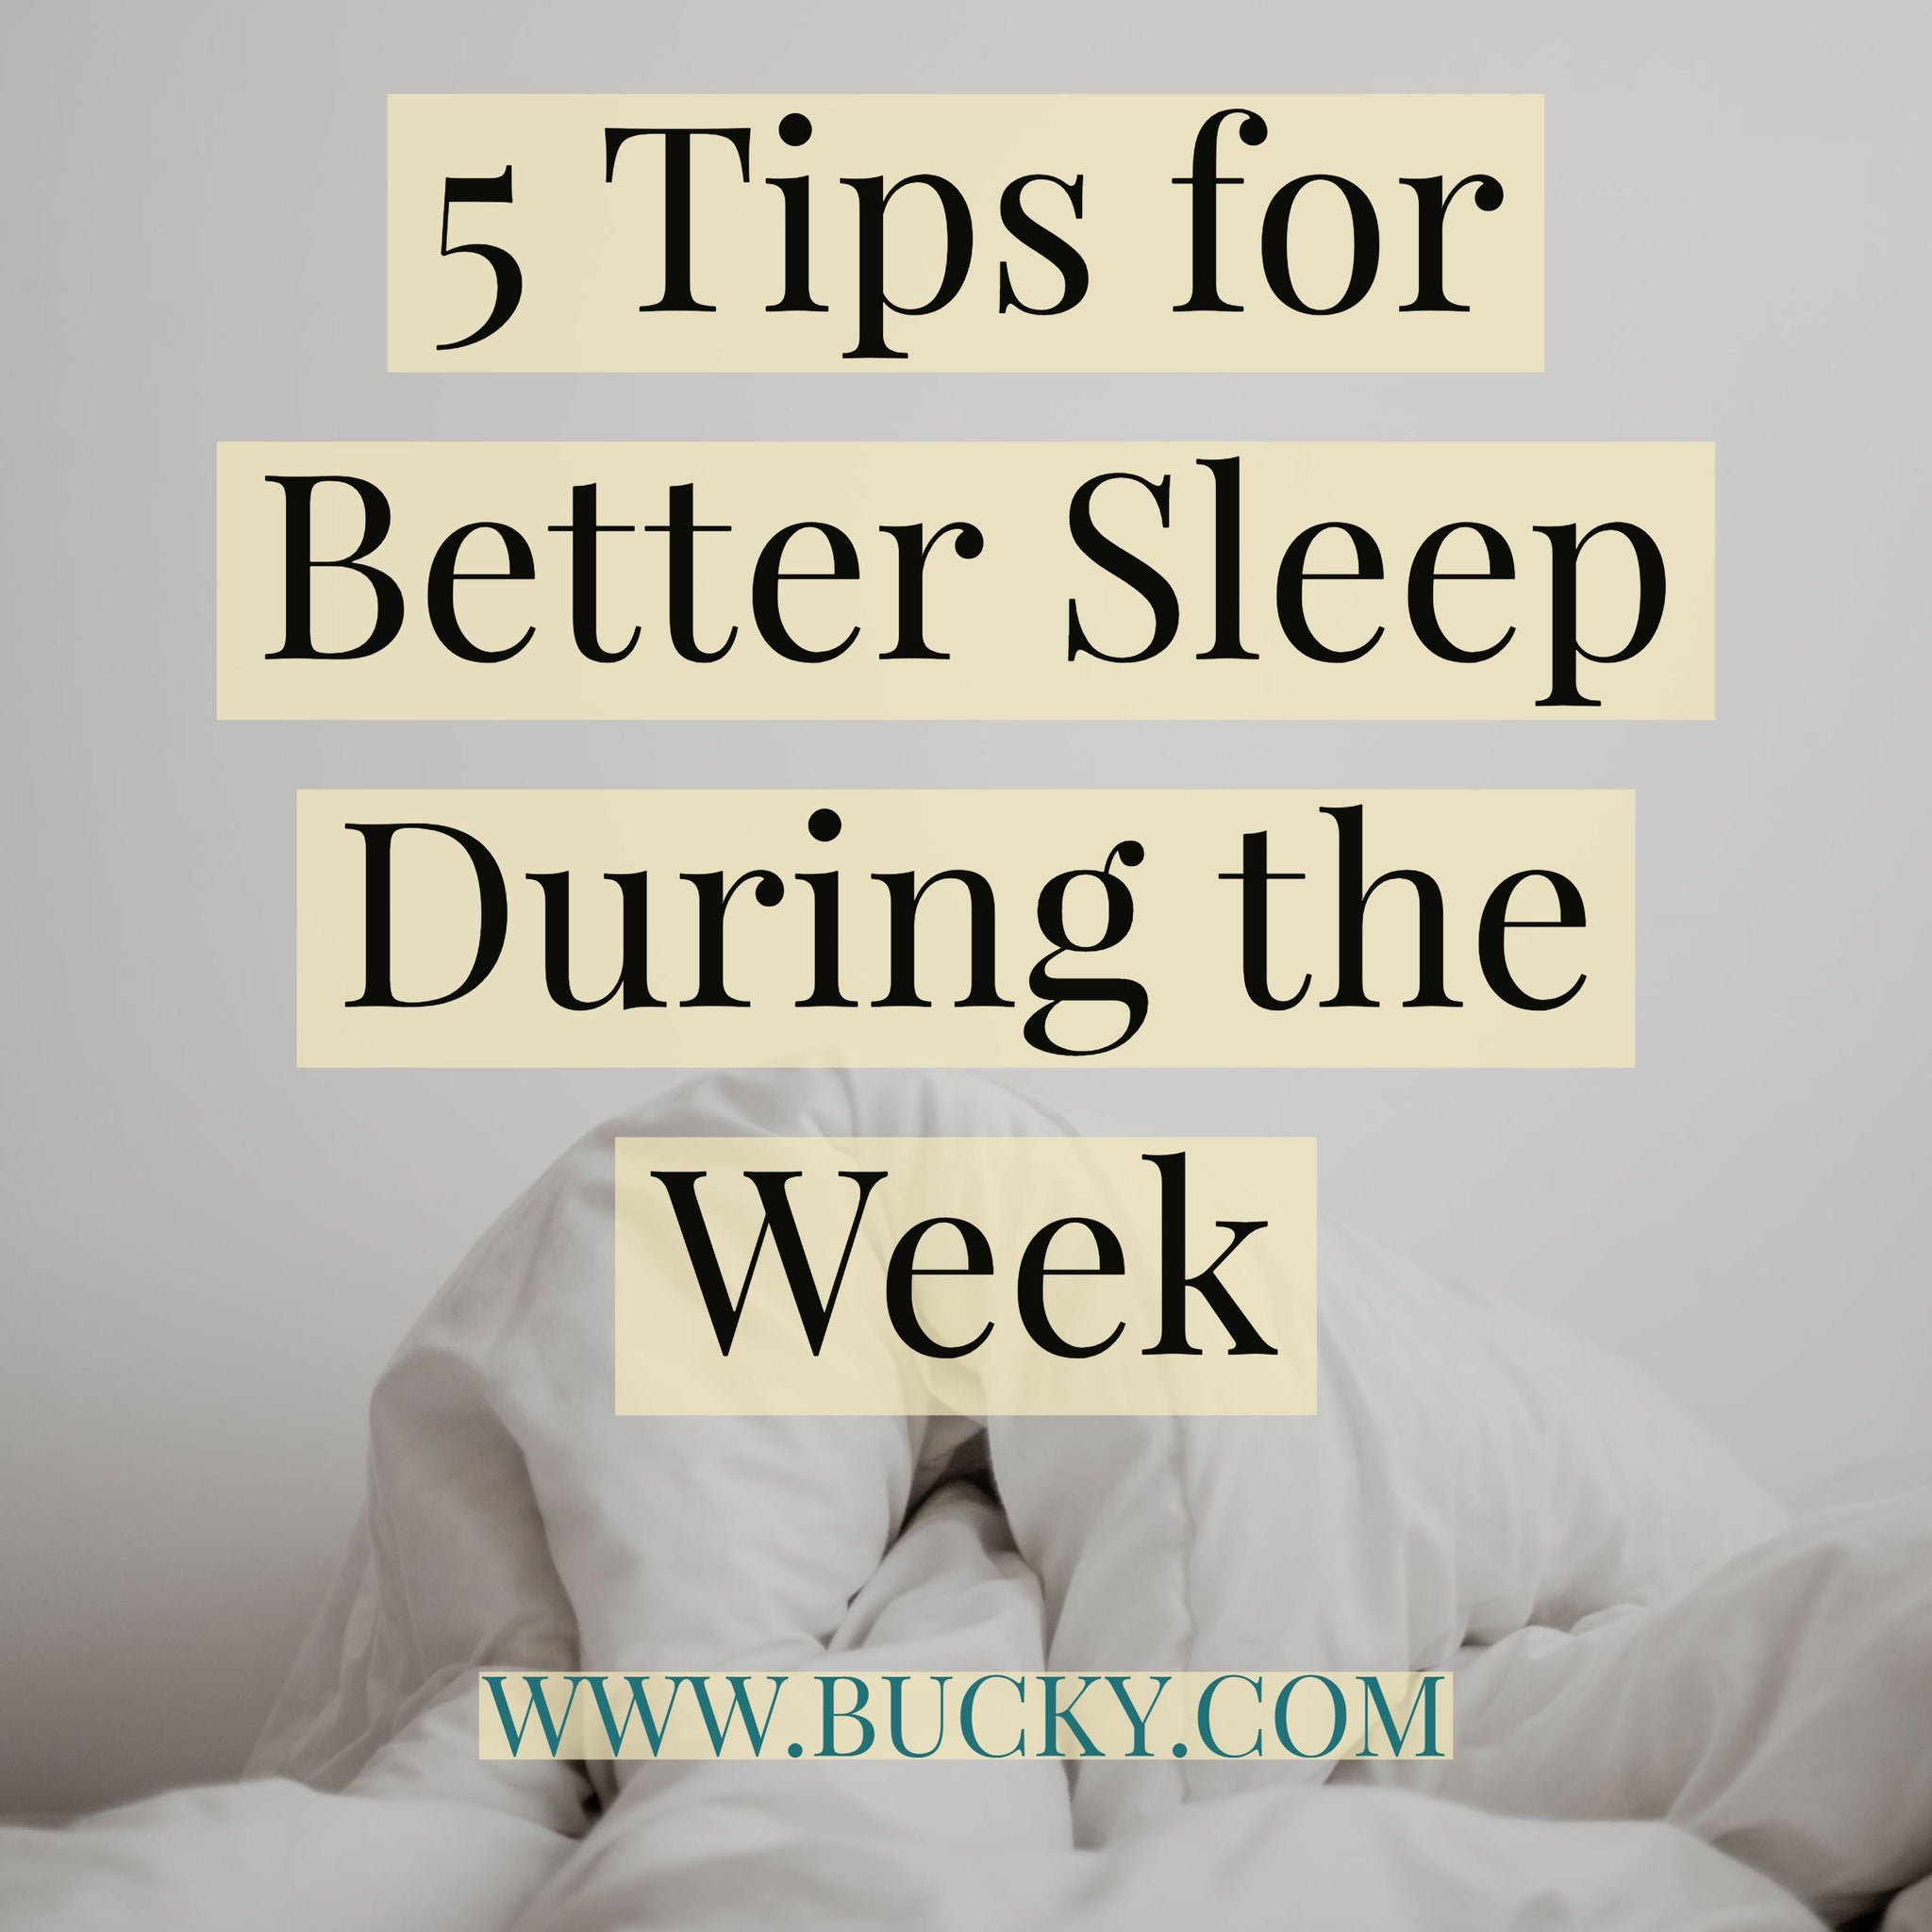 5 Tips for Better Sleep During the Week